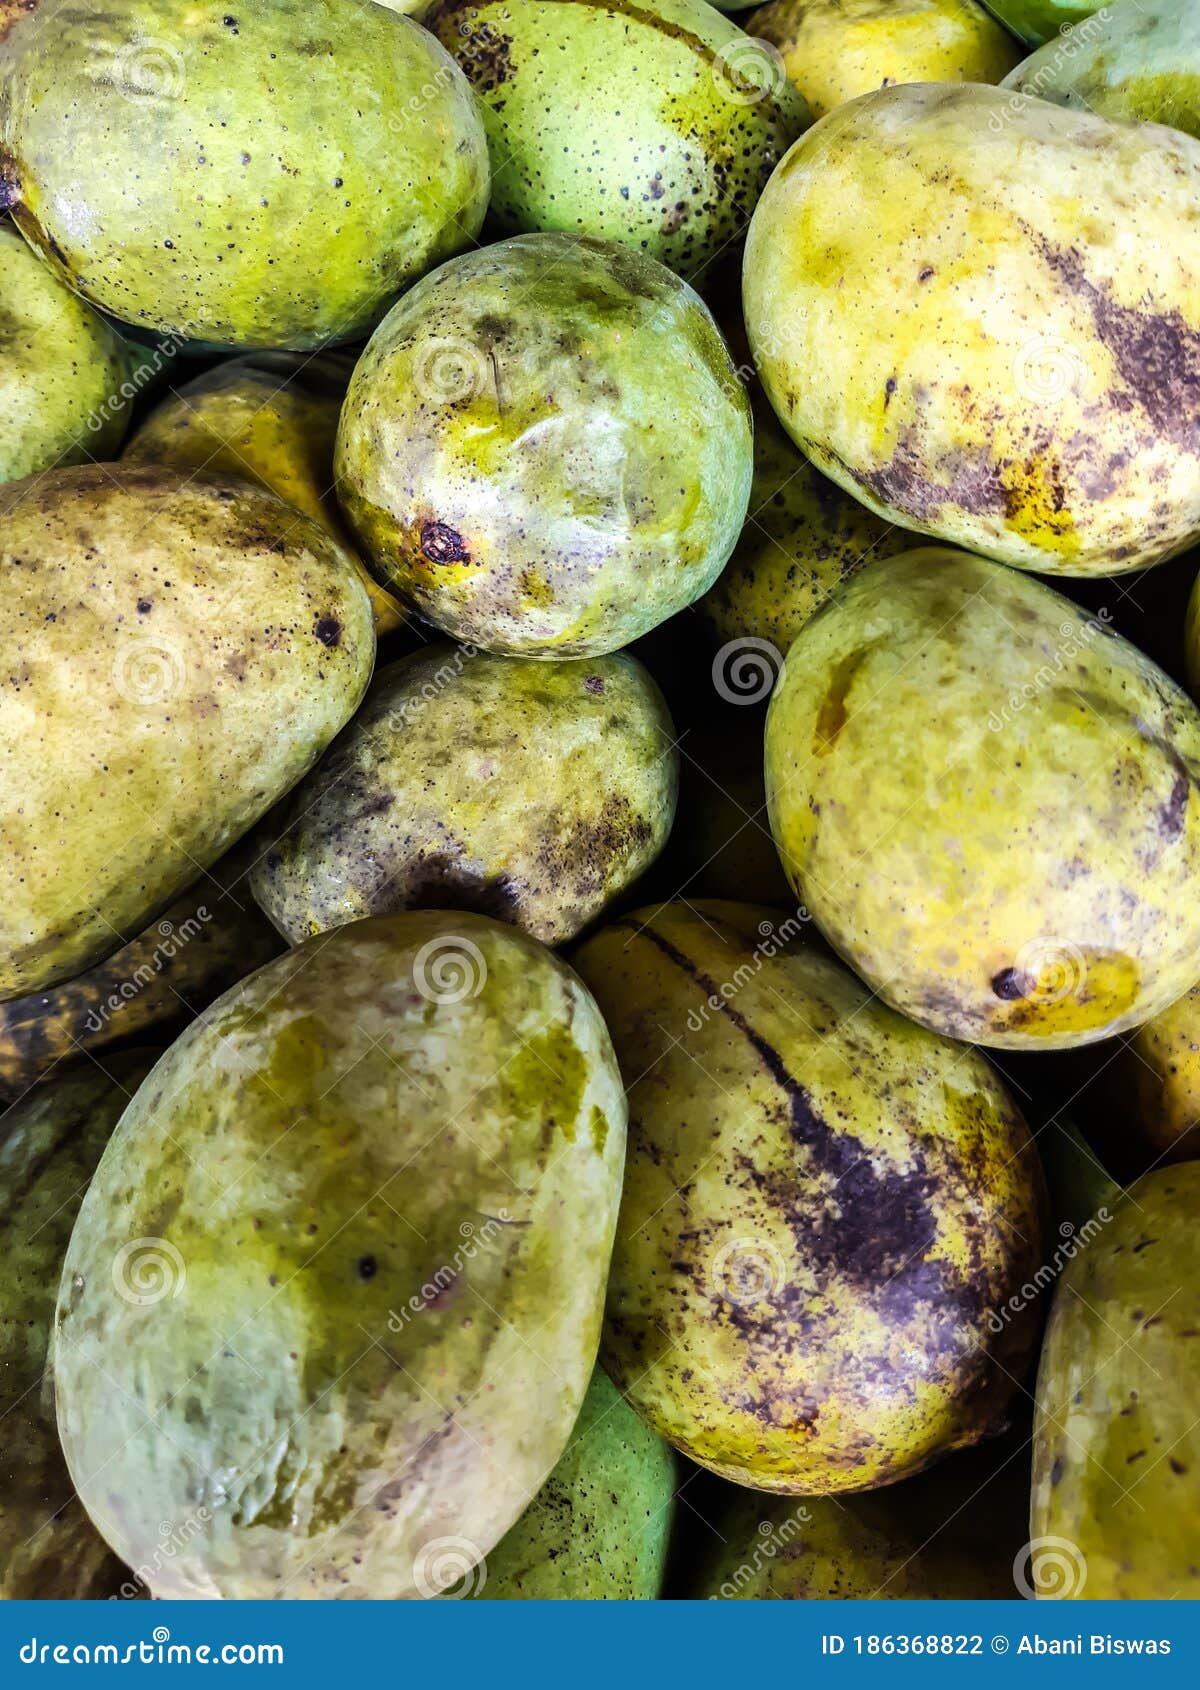 Mango Is The National Fruit Of India. This Fruit Is Very Testy. Many ...